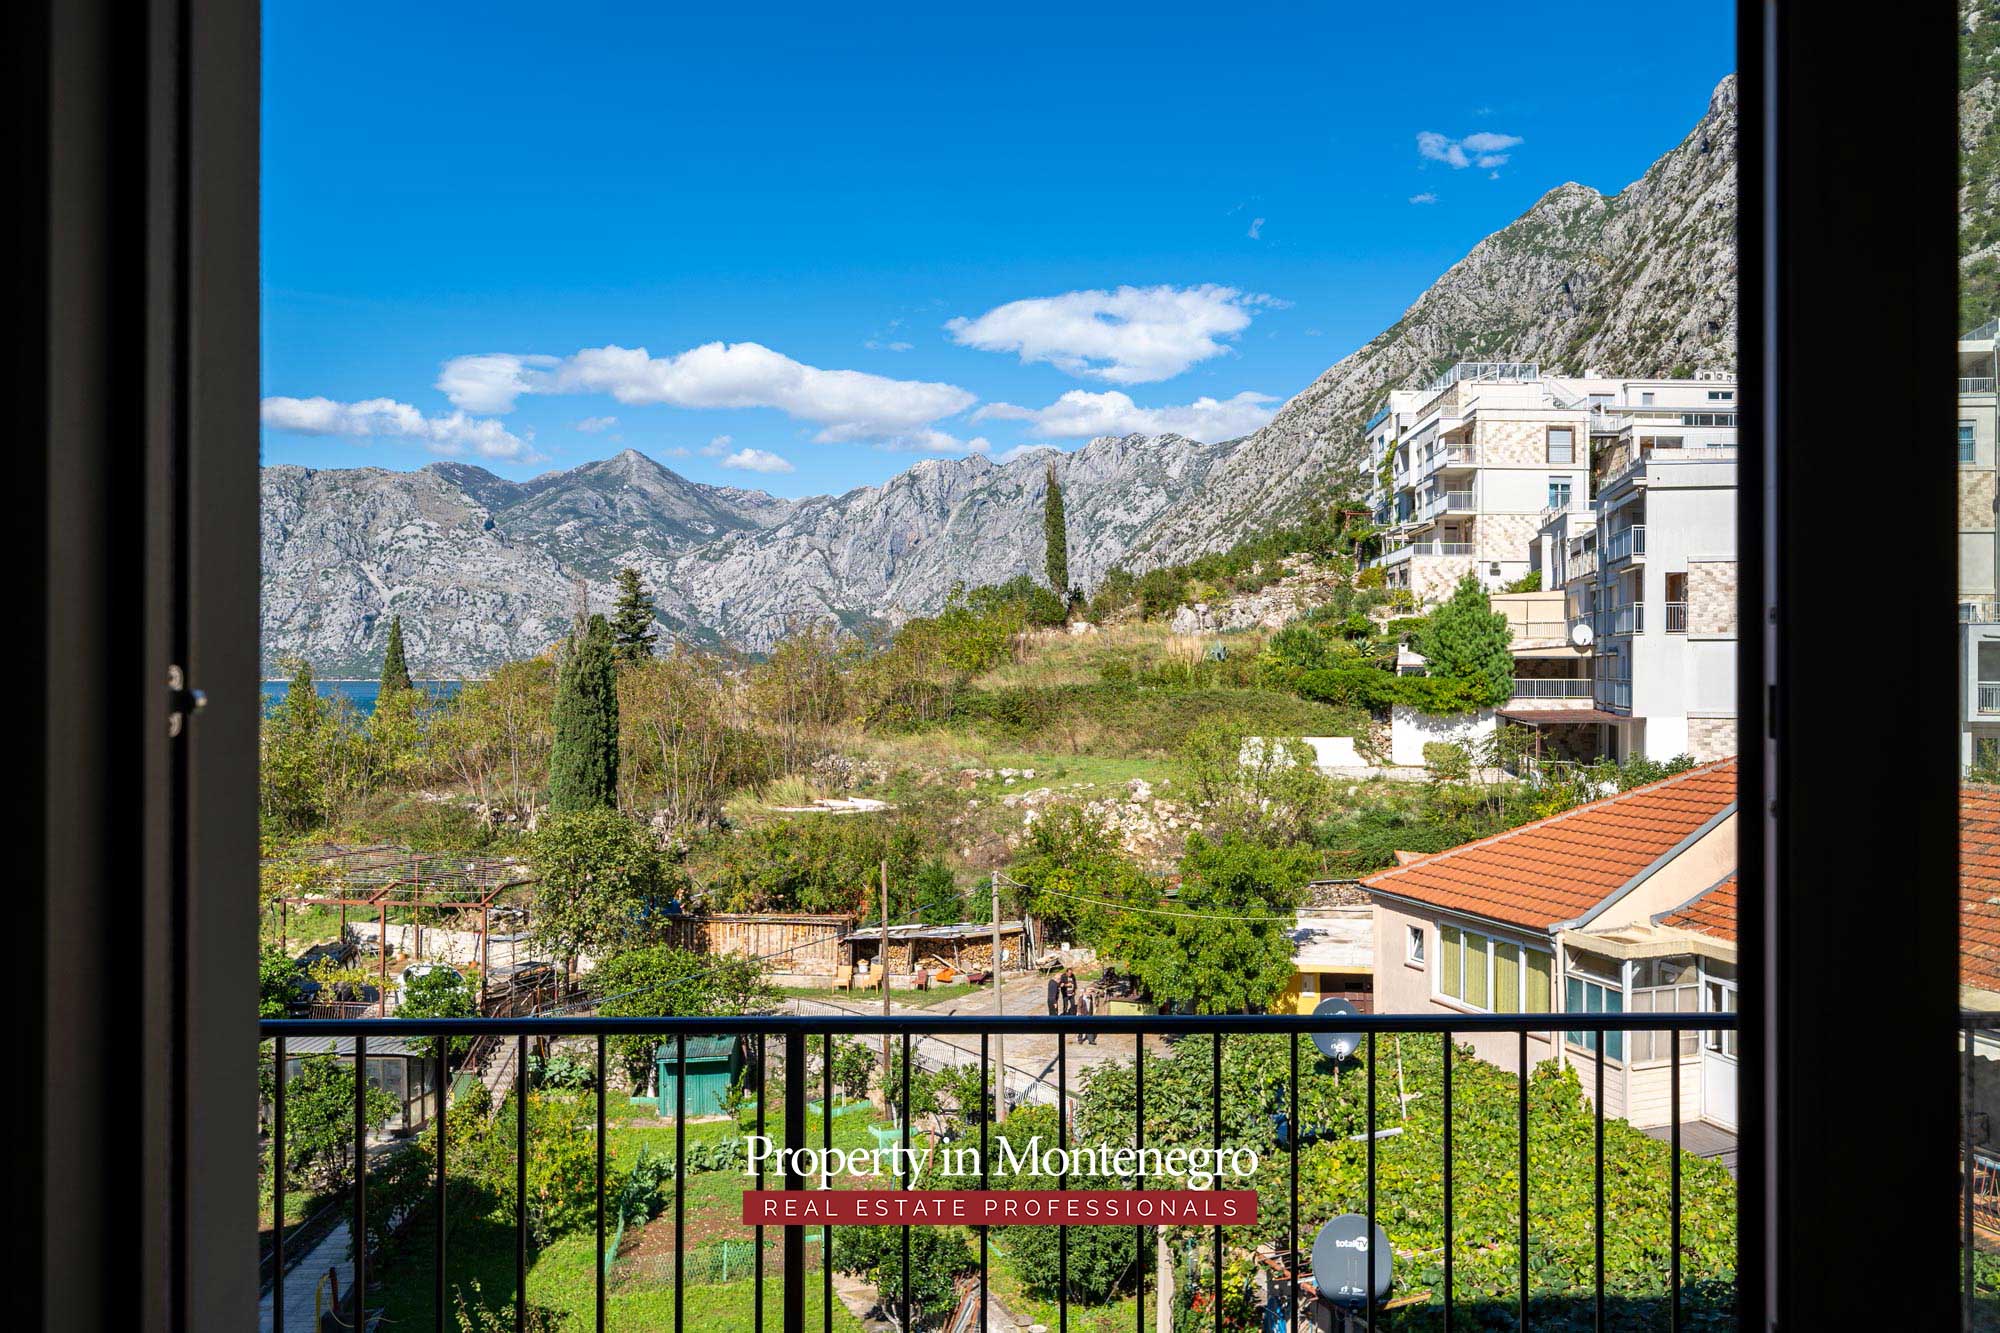 Seaview apartment for sale in Kotor Bay